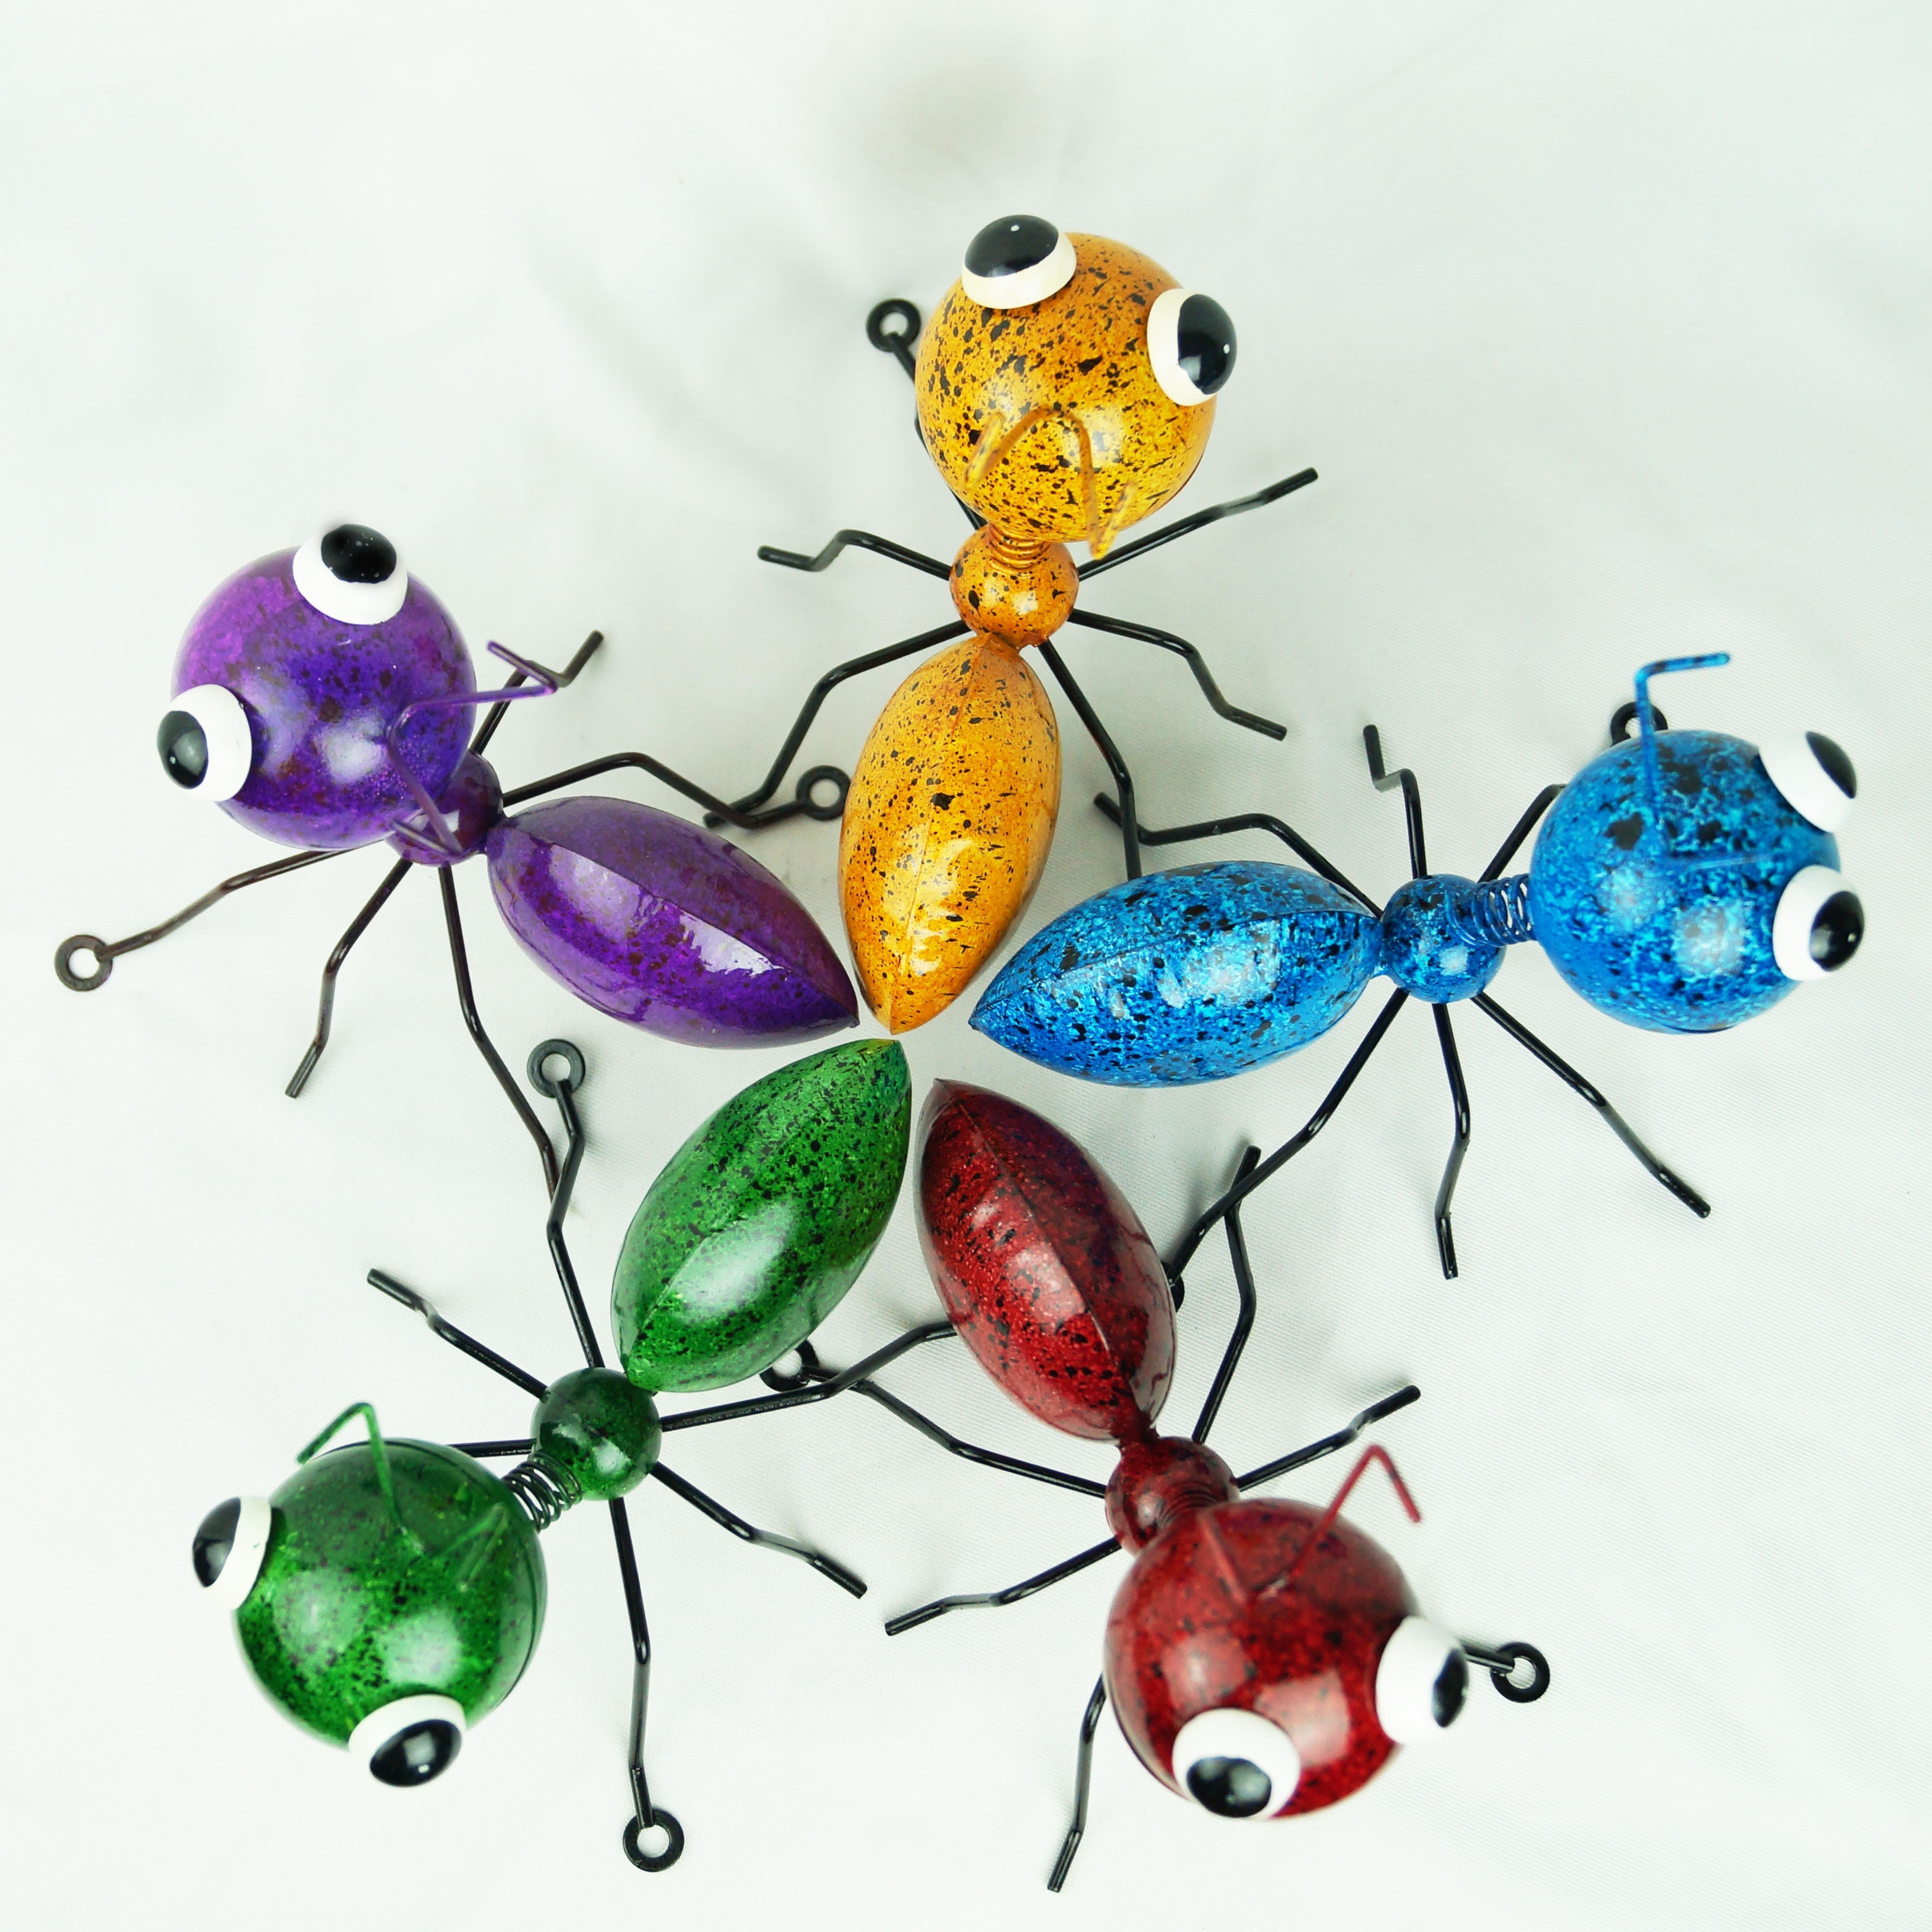 

1pc Large Size Metal Ant Statue Yard Decoration Garden Ant Sculpture Wall Hanging Garden Lawn Decoration Indoor And Outdoor Colorful Cute Insect Sculpture